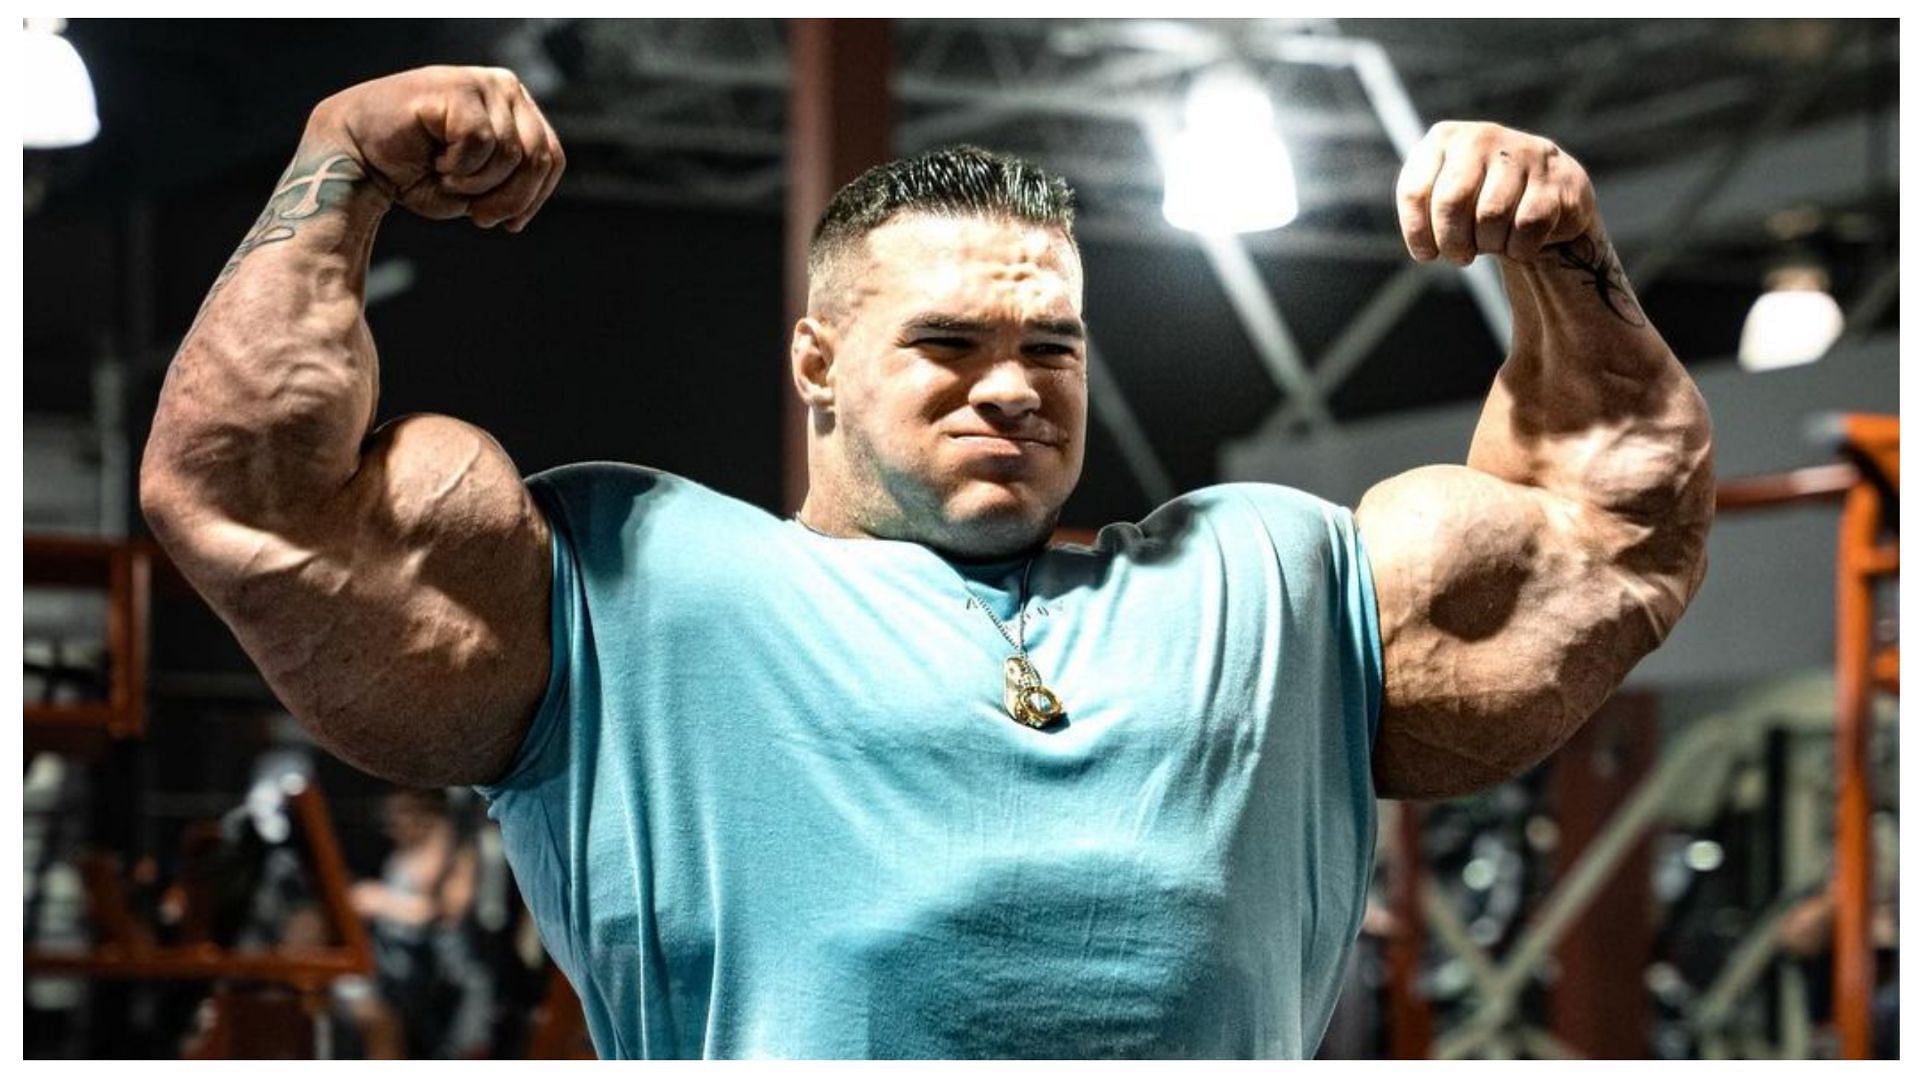 Nick Walker shows off his impressive arms and chest at the 2022 Mr. Olympia contest prep